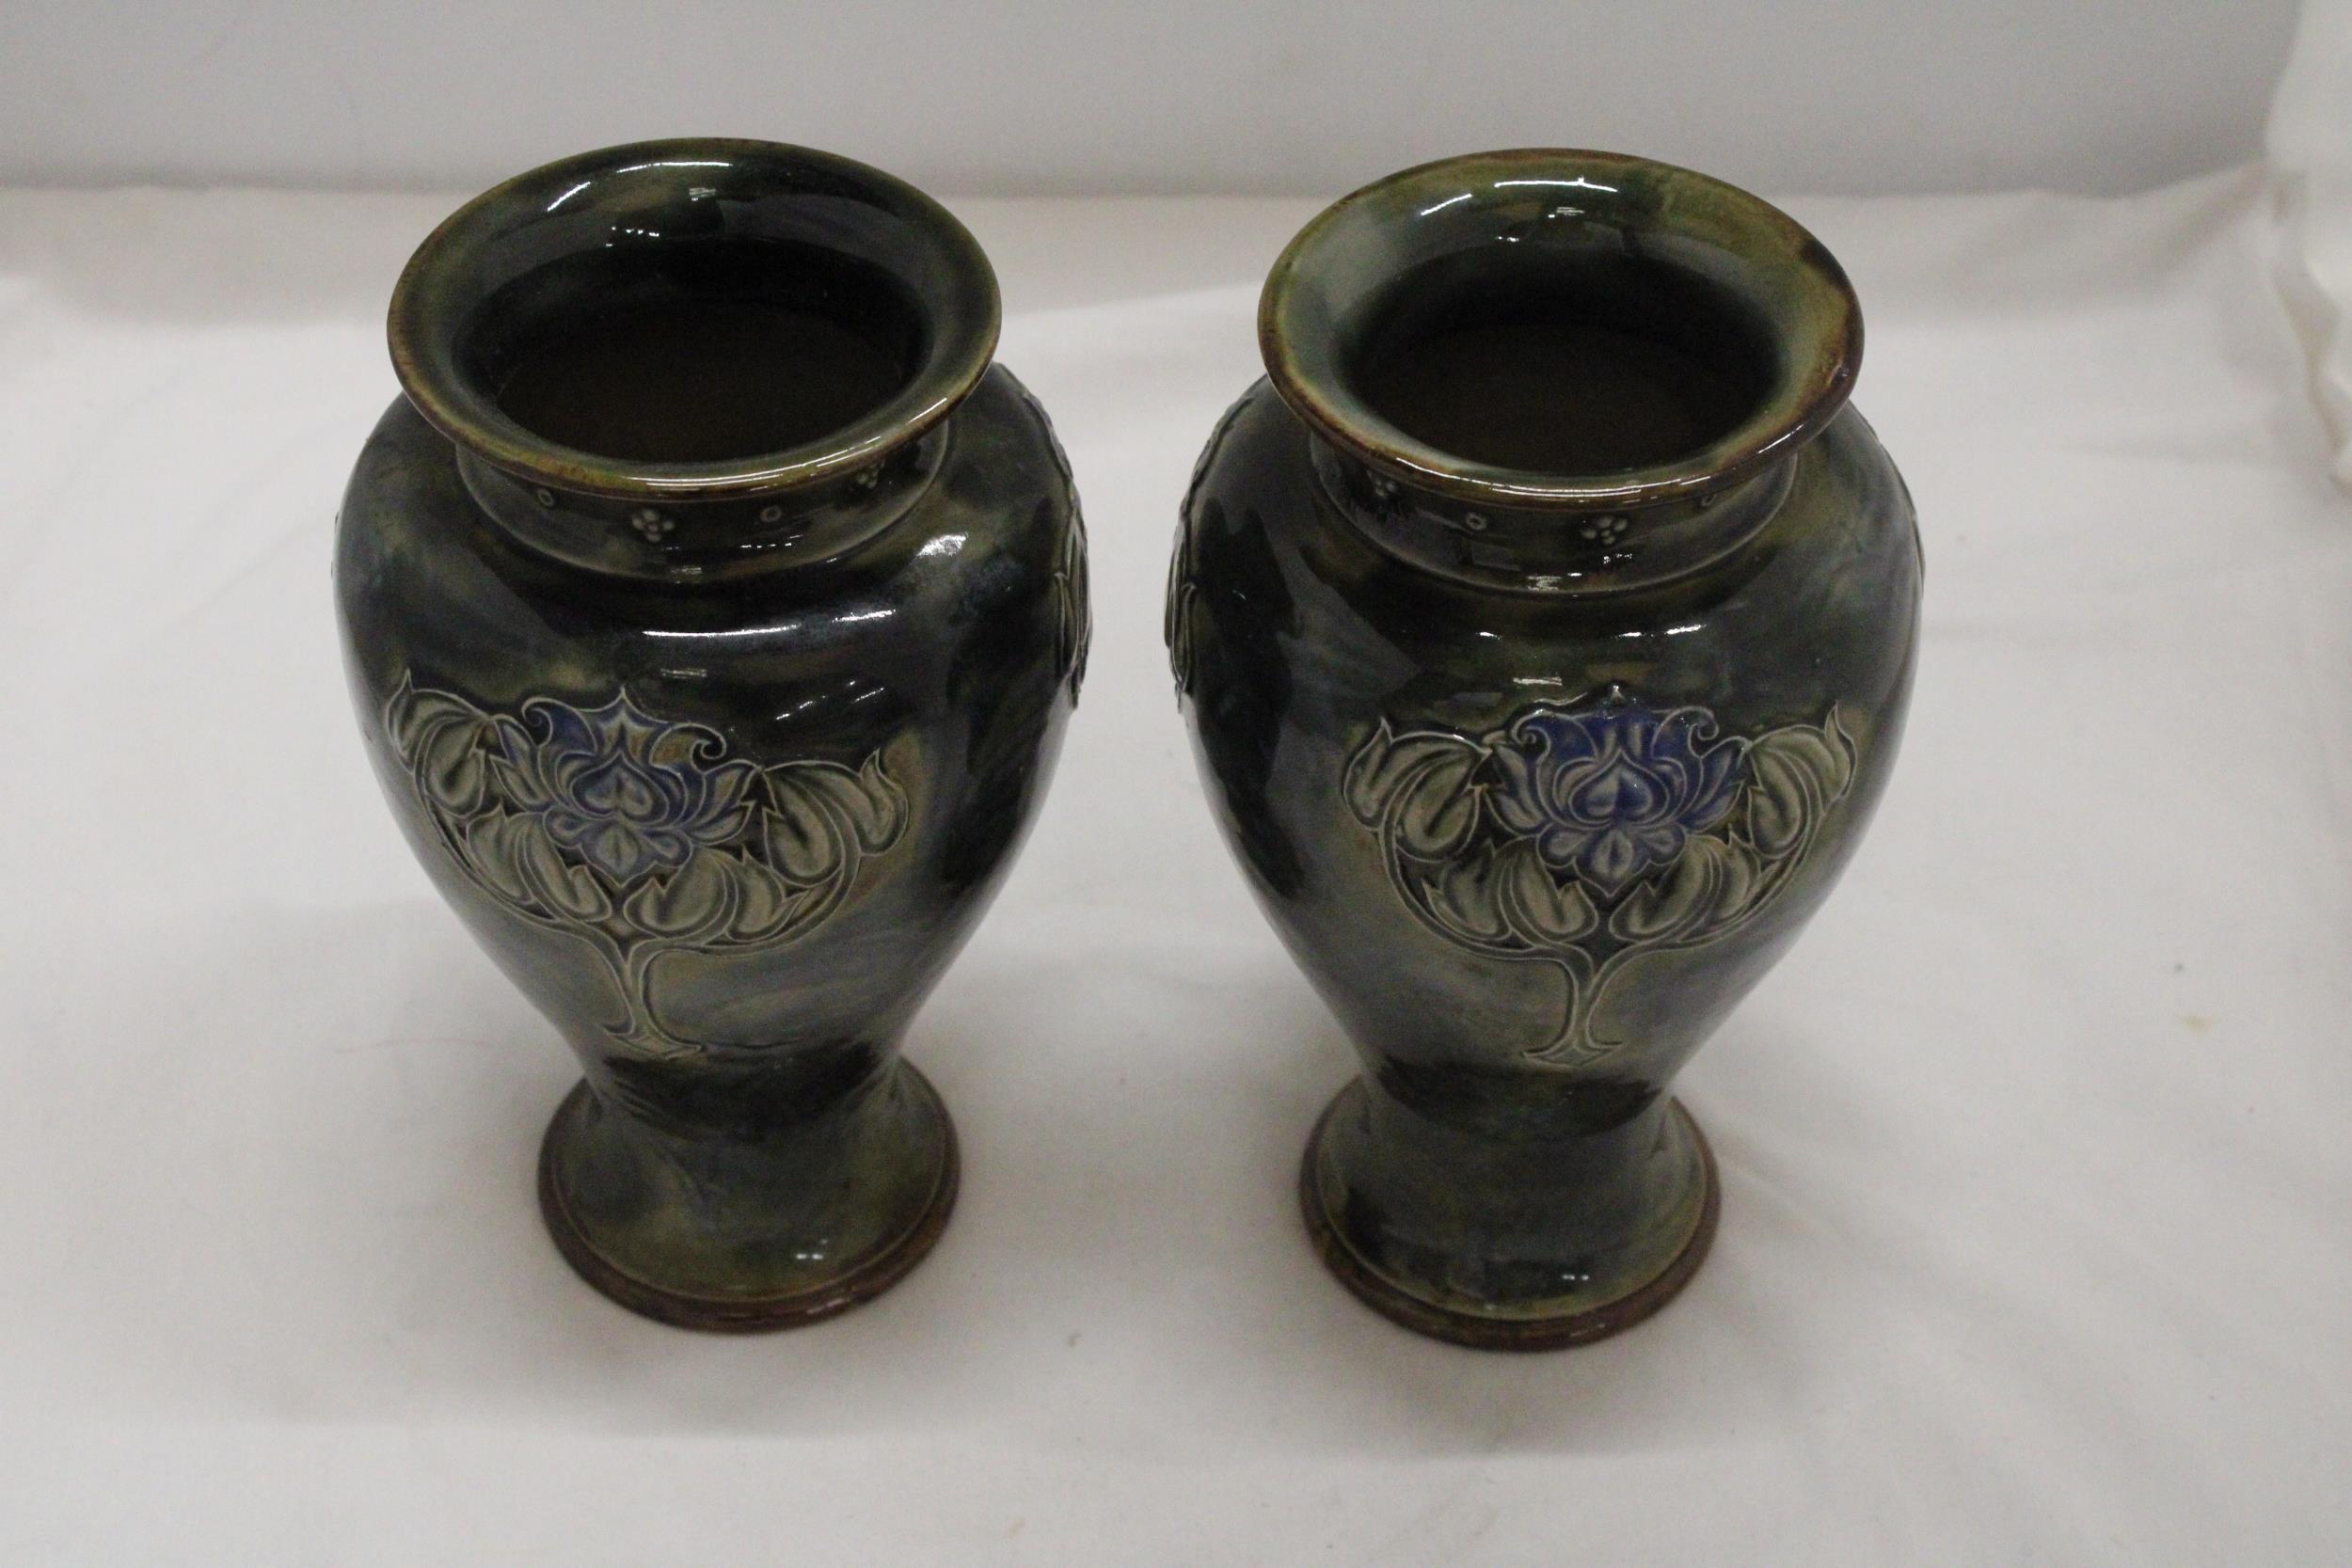 A PAIR OF ROYAL DOULTON LILY PARTINGTON ART NOUVEAU STYLE VASES WITH RELIEF FLOWERS - Image 2 of 7